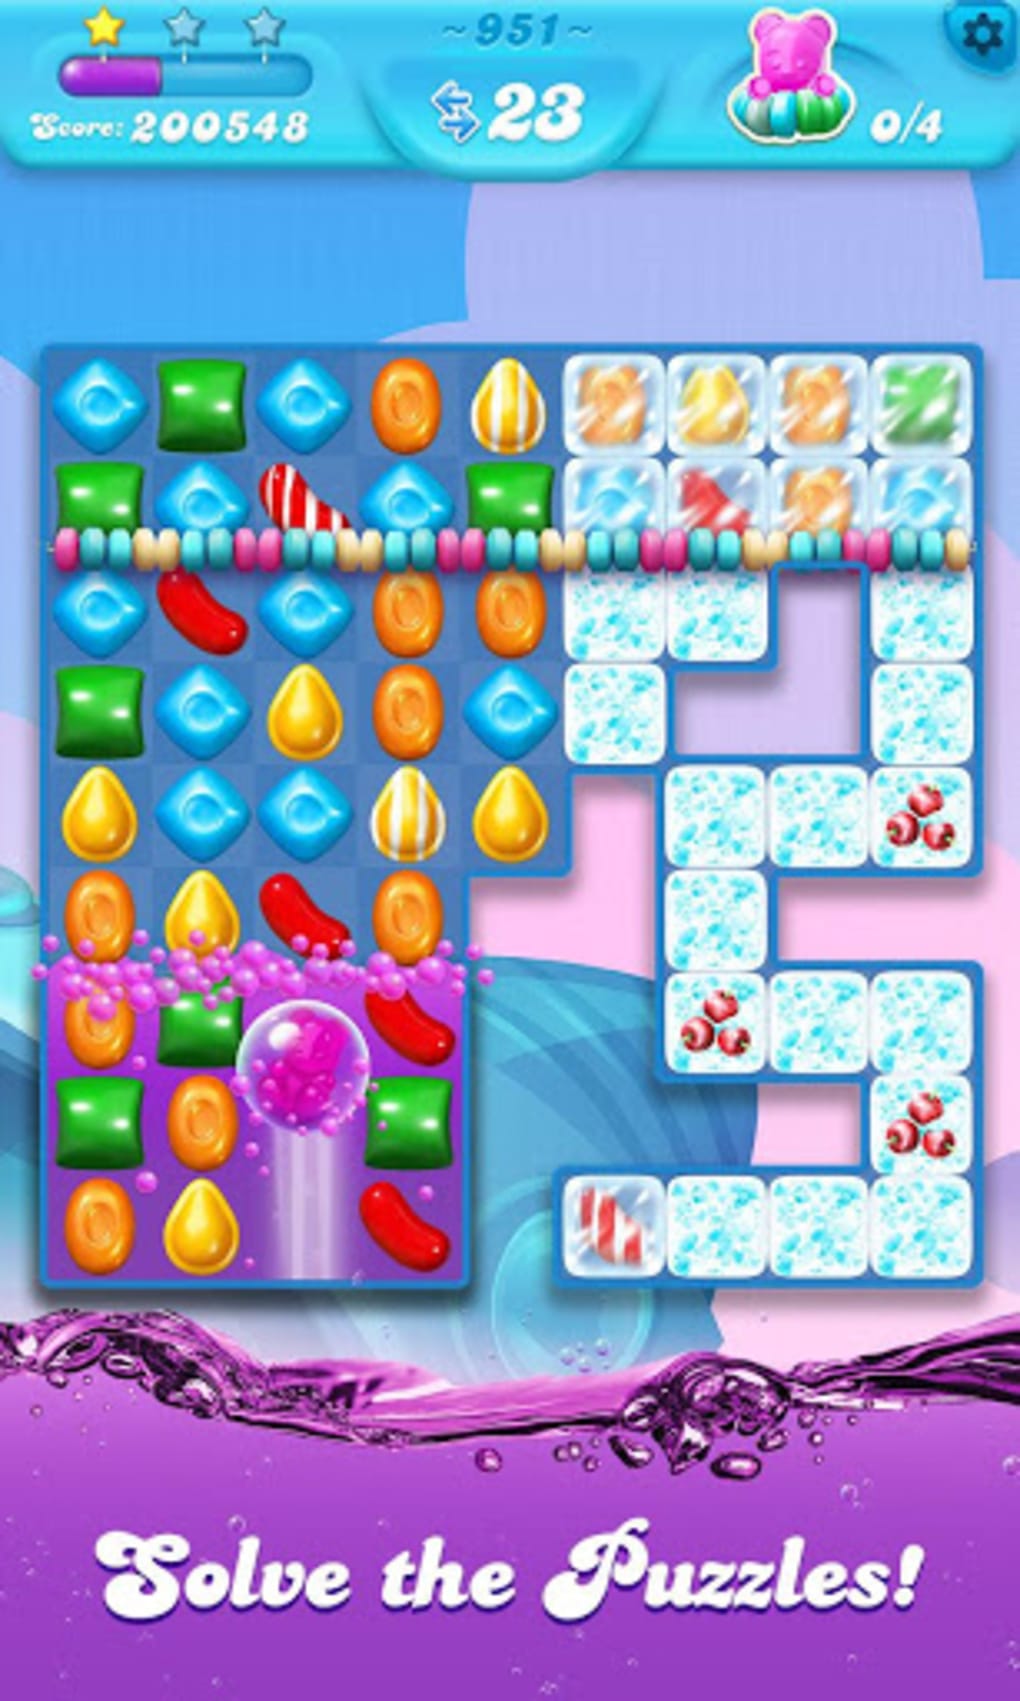 candy crush soda saga why does it keep going back to day one when i play every day